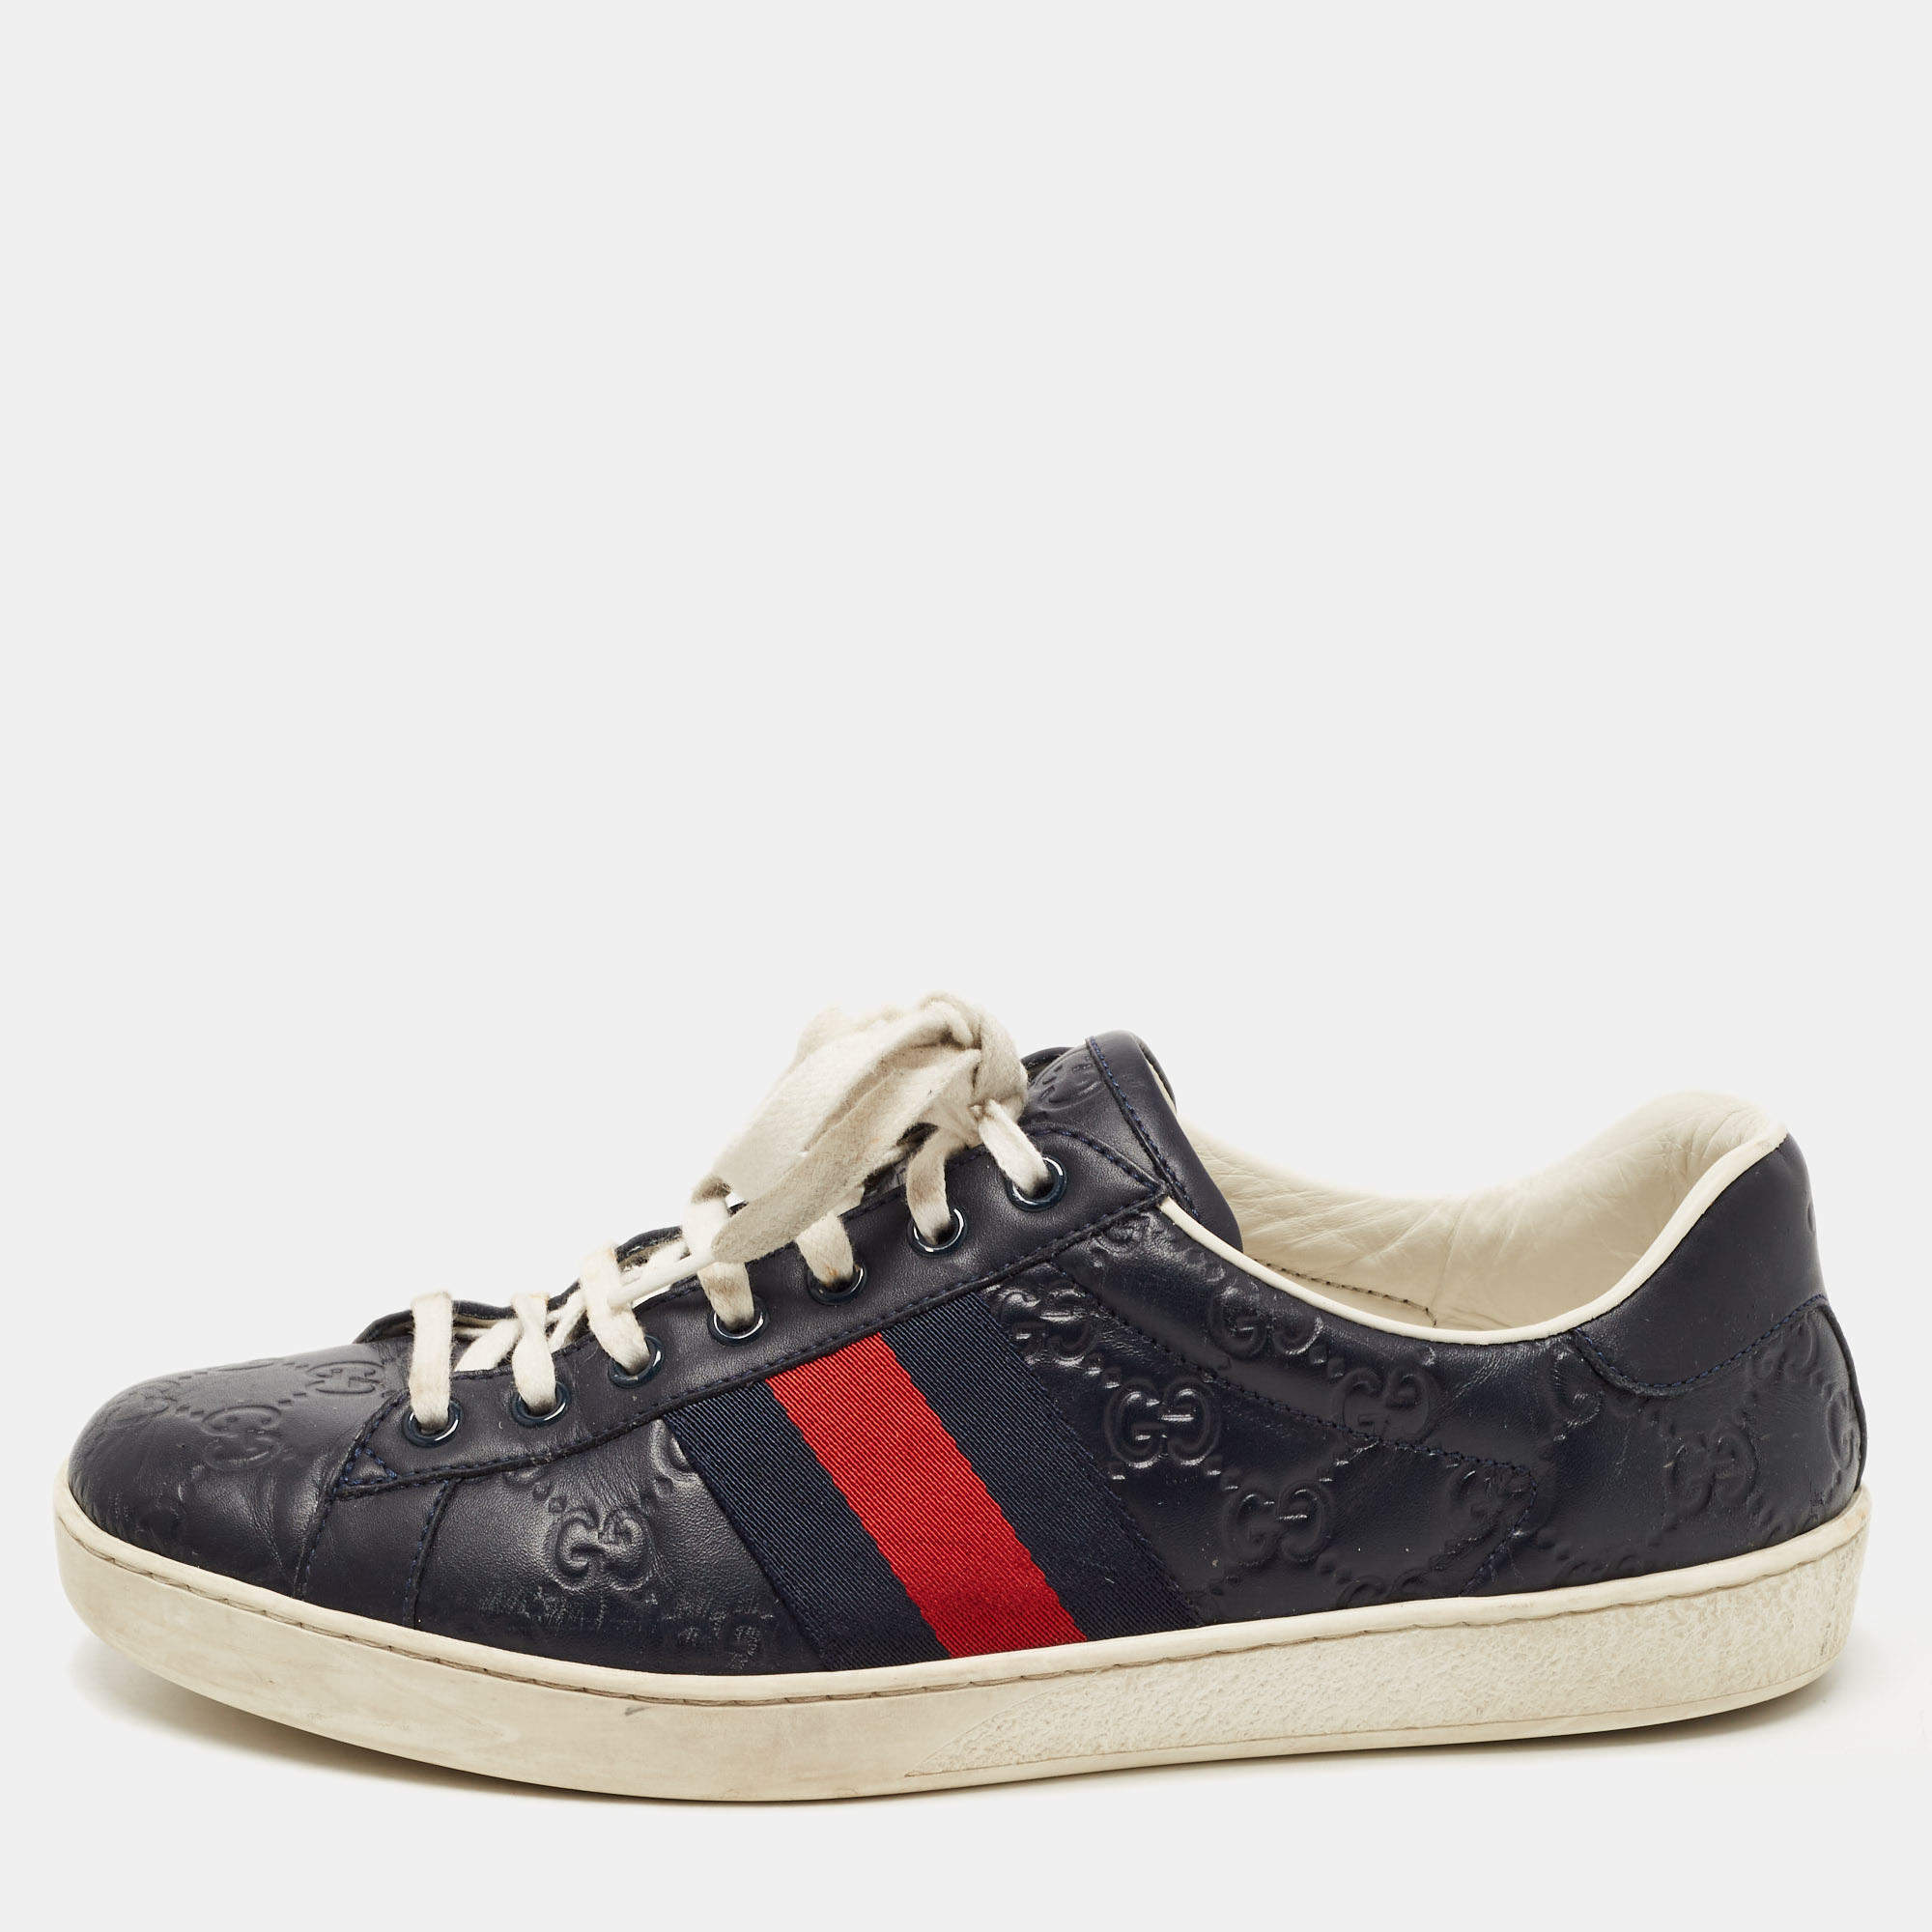 Gucci Navy Blue Guccissima Leather Ace Sneakers Size 41.5 